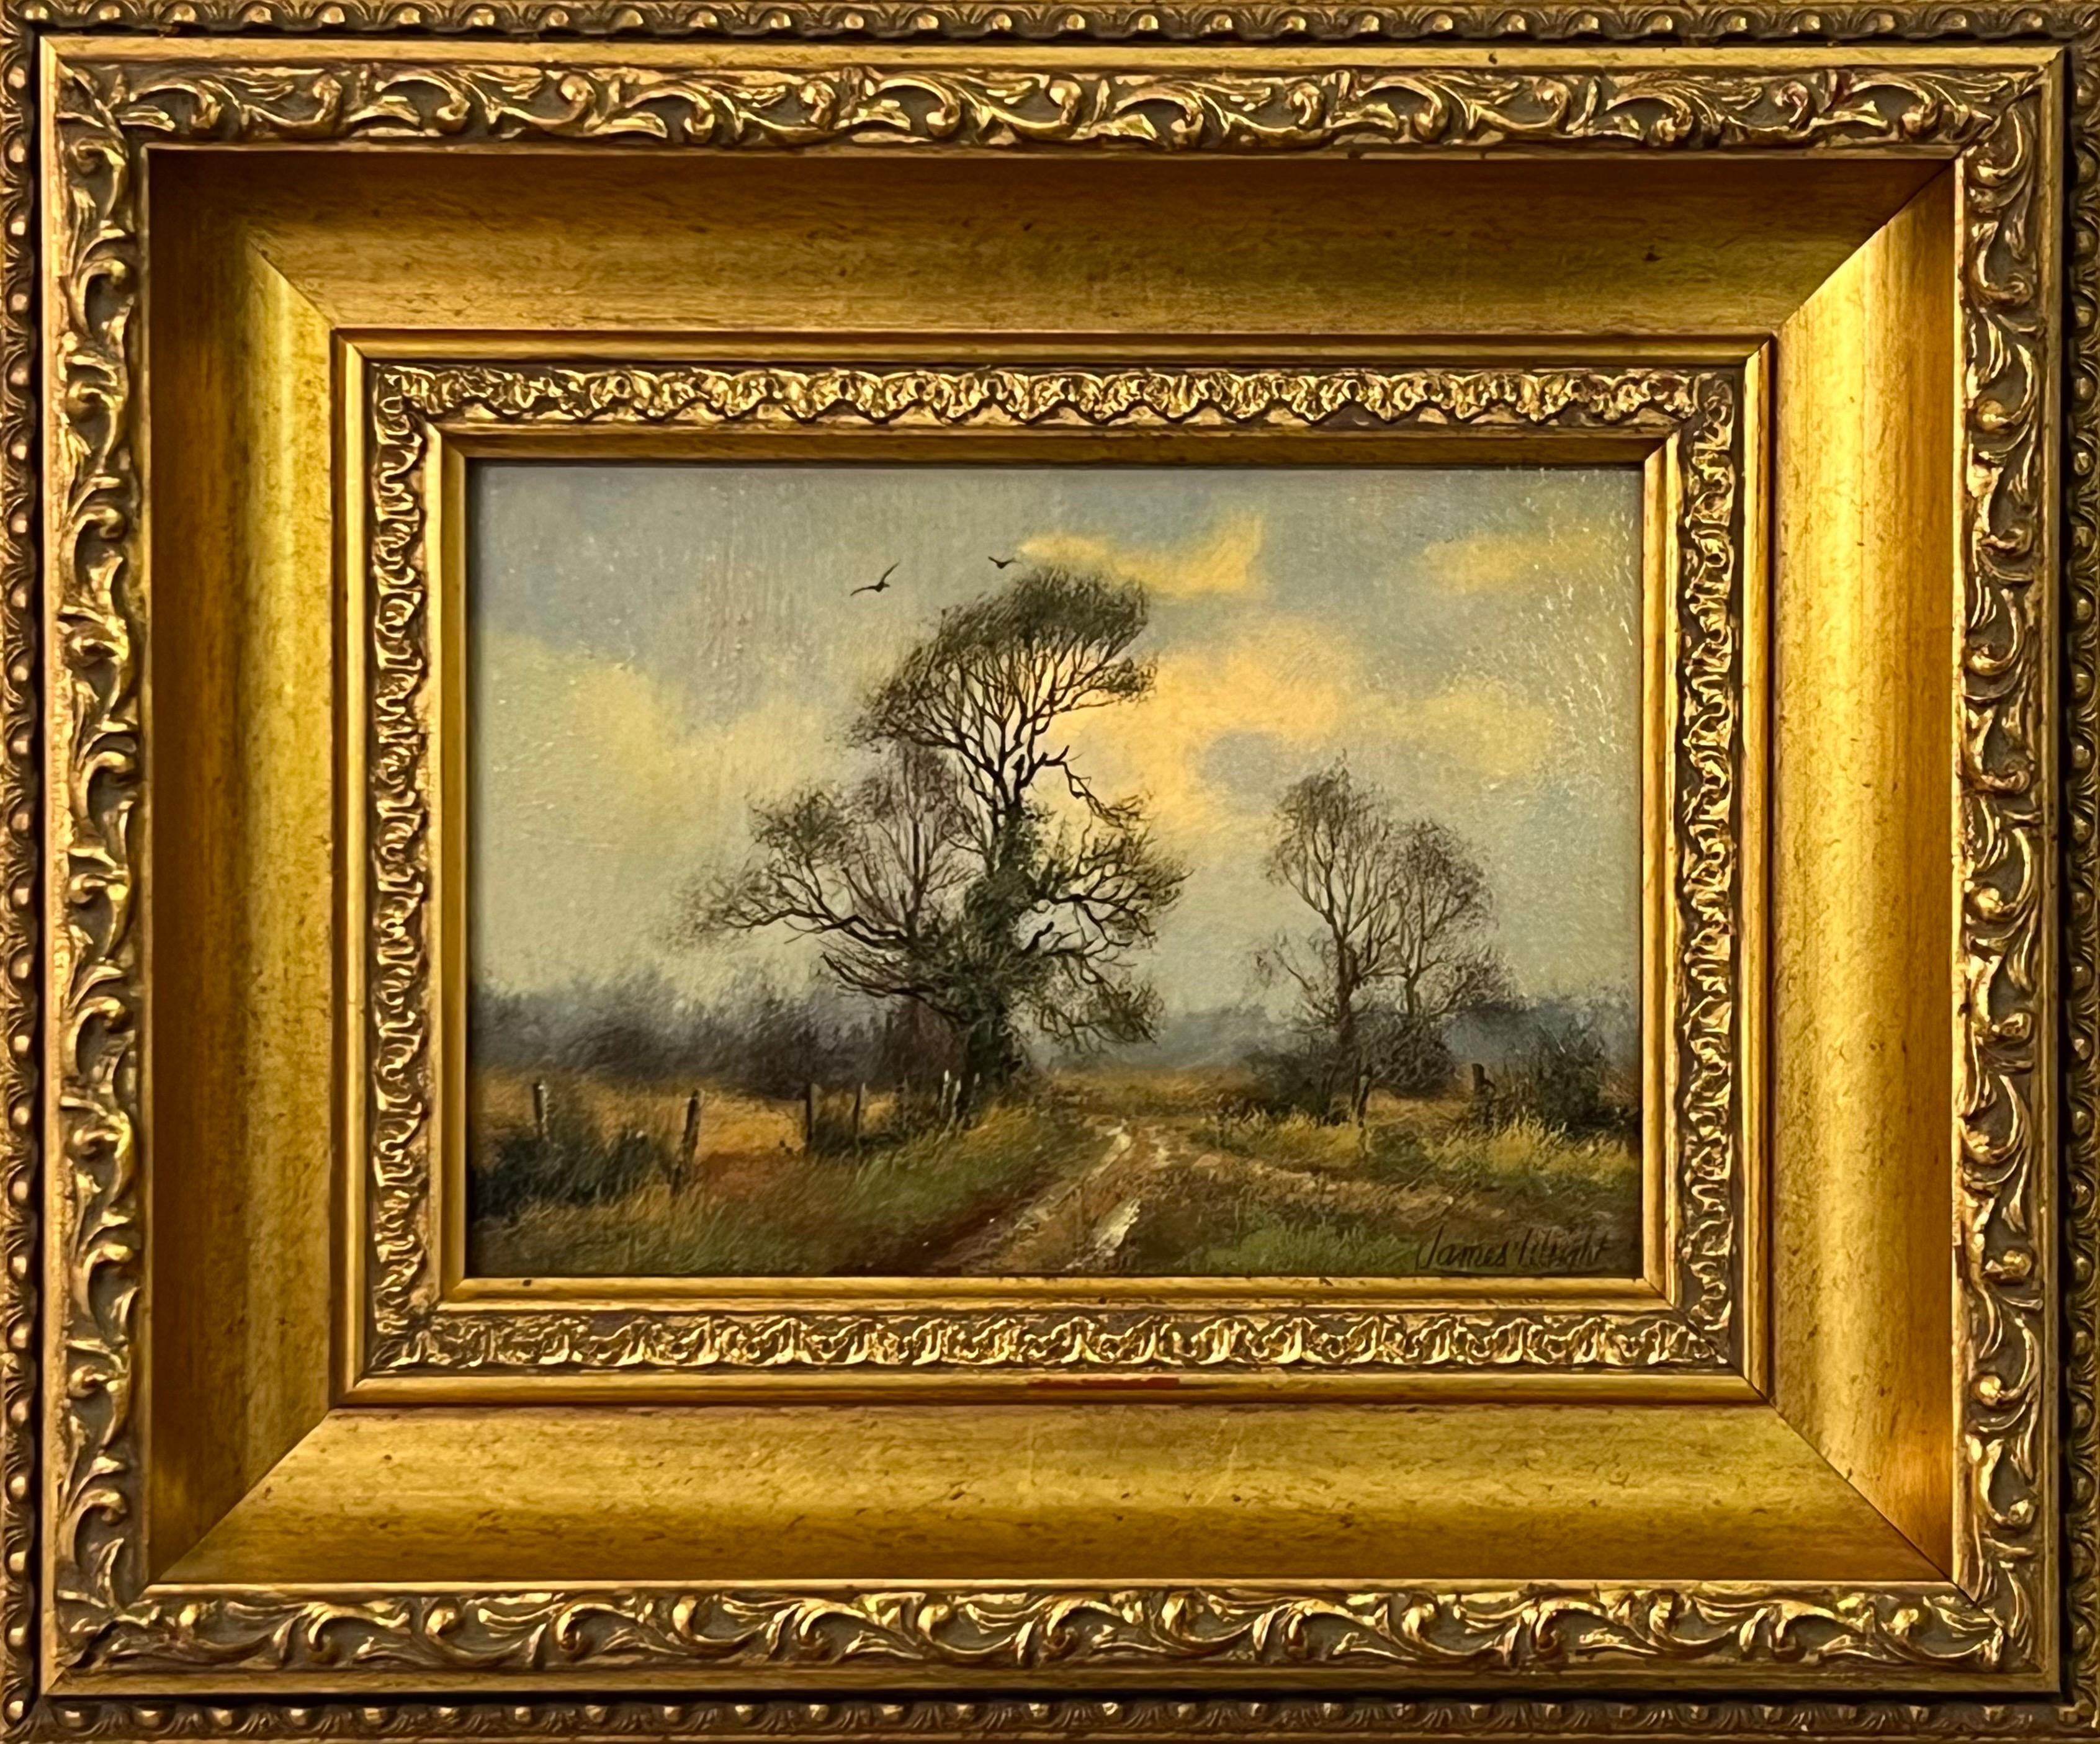 Country Lane with Trees & Birds in English Countryside by 20th Century Artist